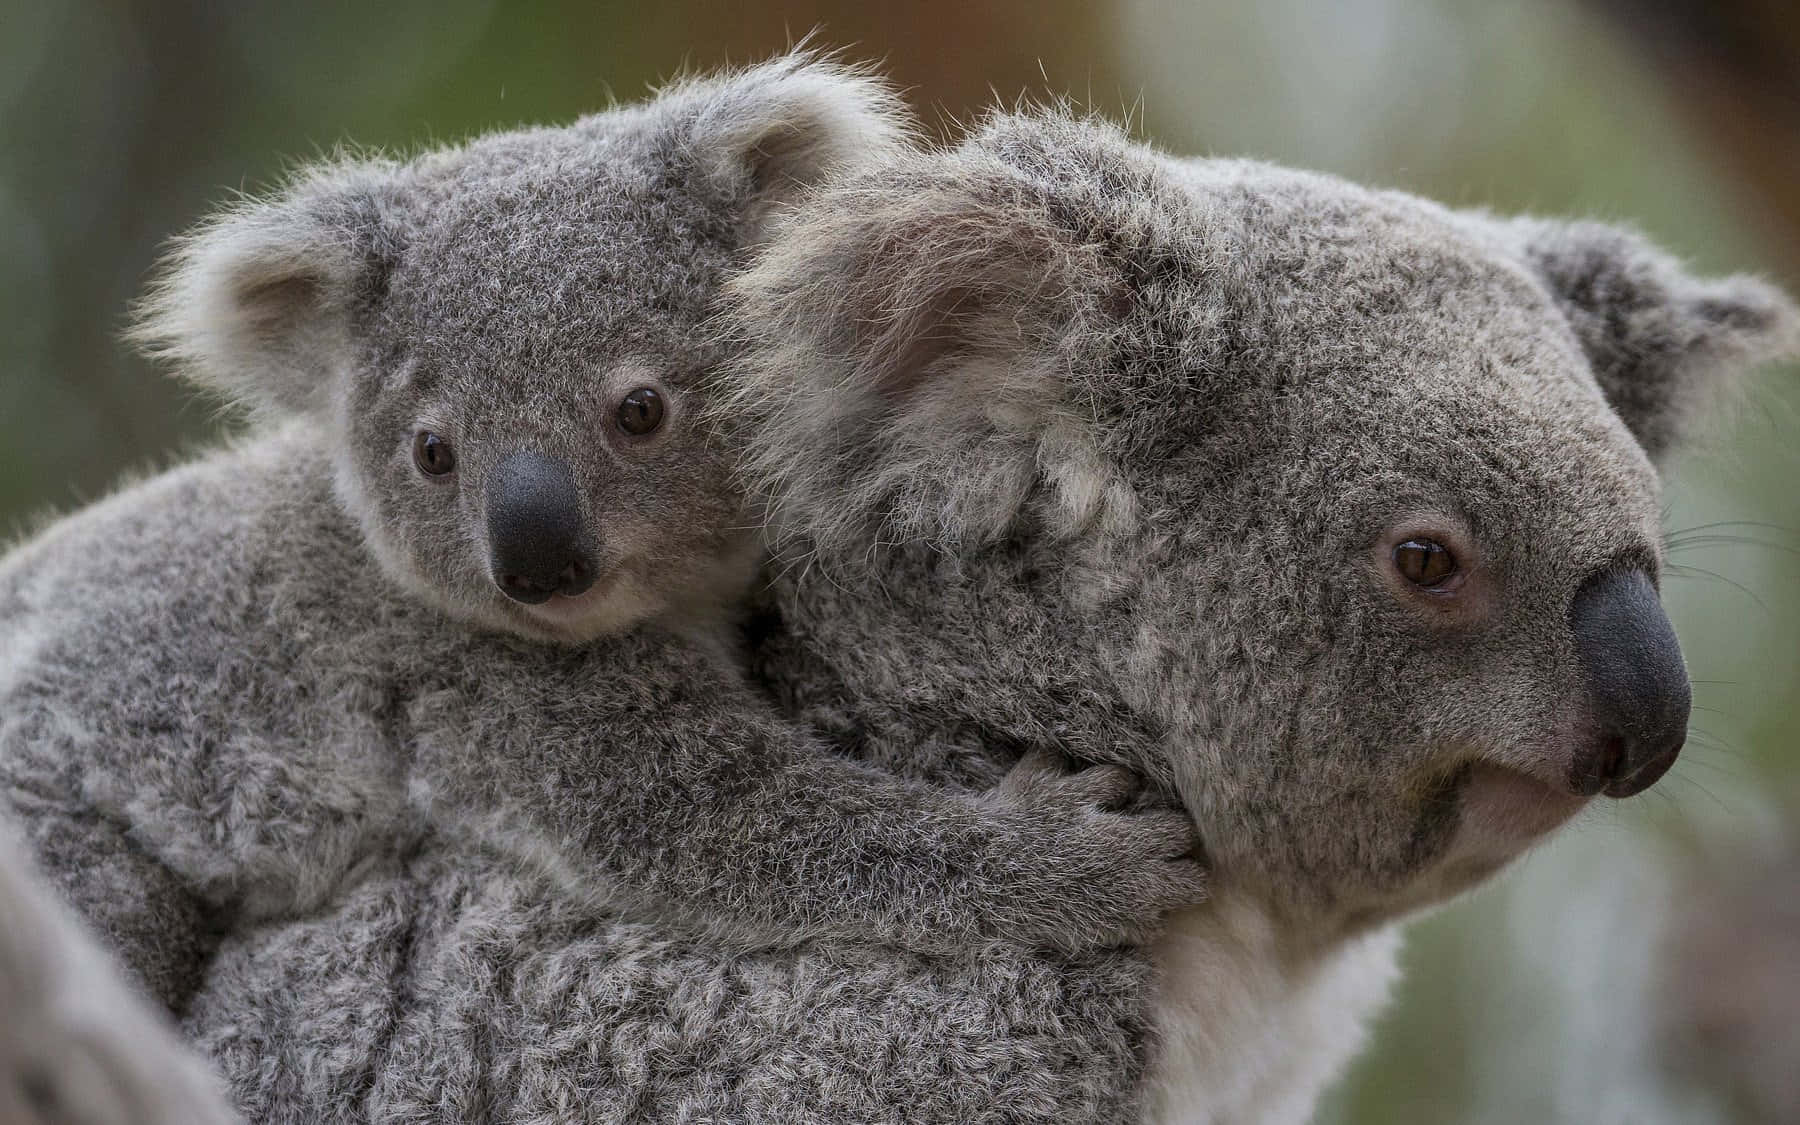 "Welcome to the World of Koalas!"